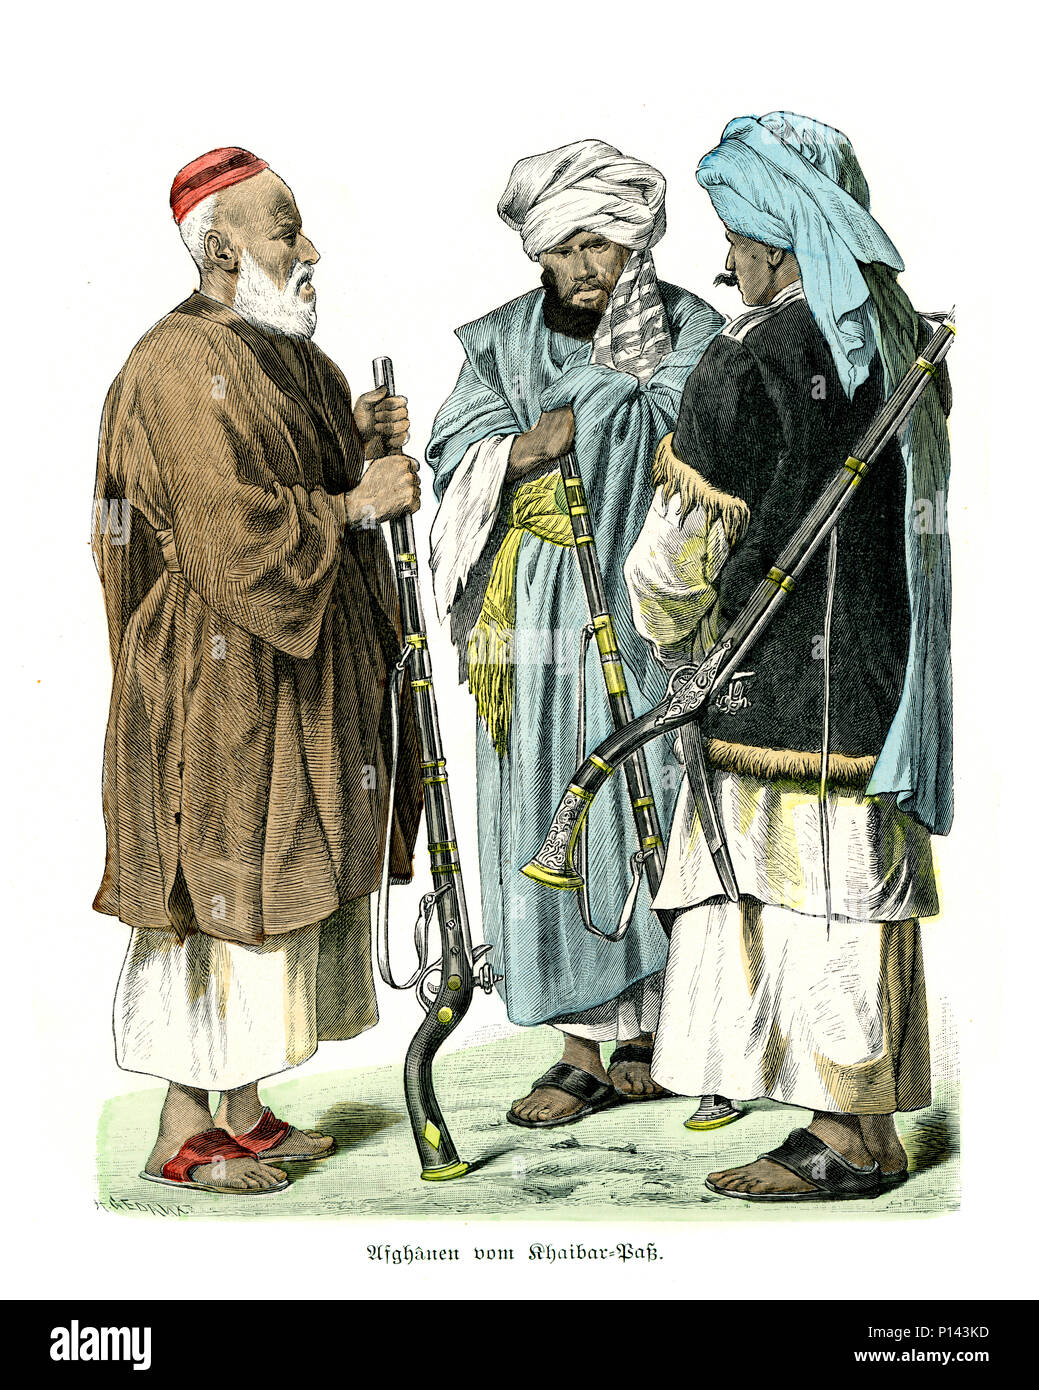 Vintage engraving of History of Fashion, Costumes of Afghanistan, 19th Century.  Afgan men with musket guns from the Khyber Pass area Stock Photo